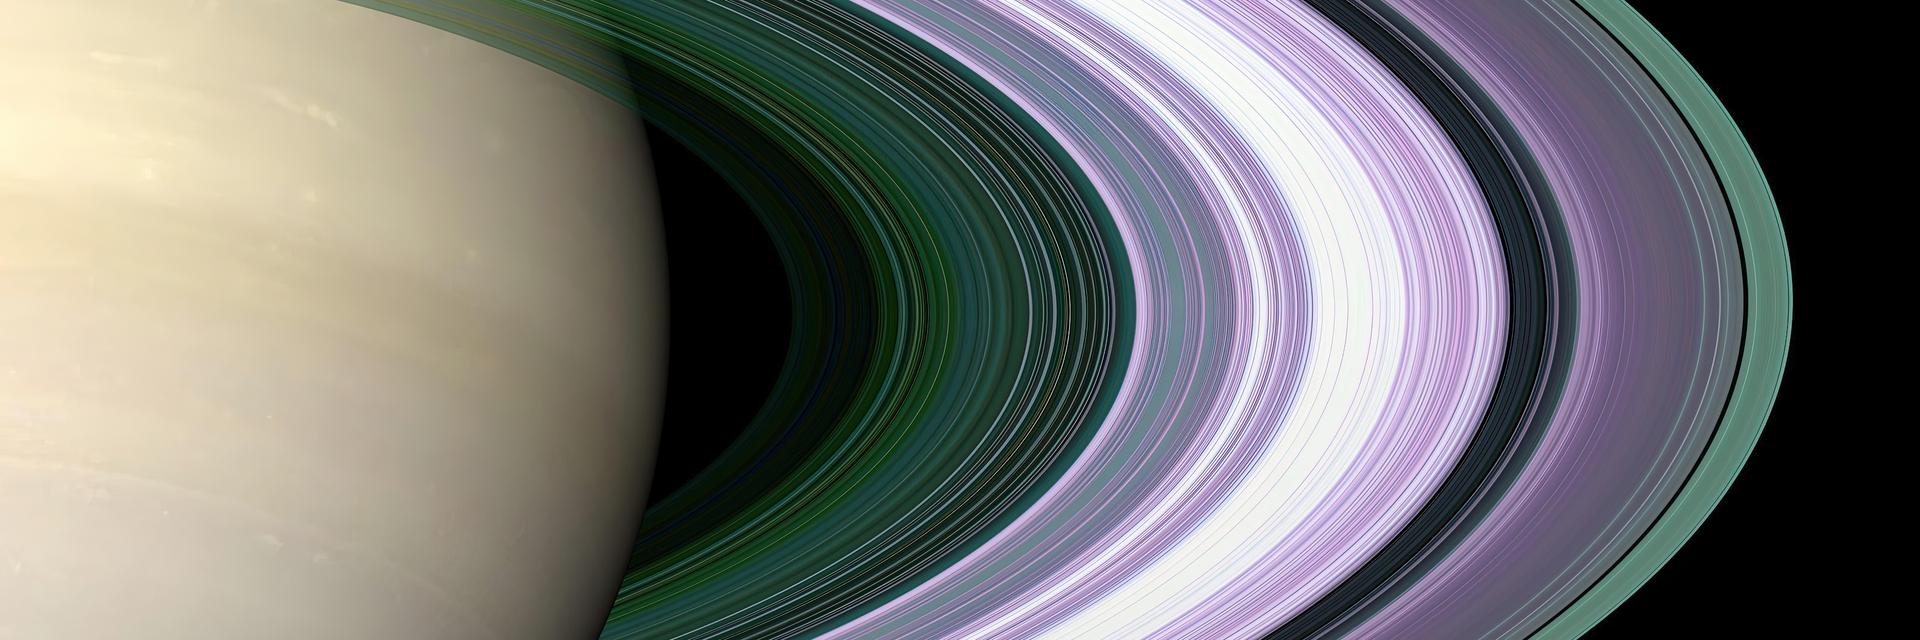 Why Does Saturn Have Rings and What Are They Made Of&#63;